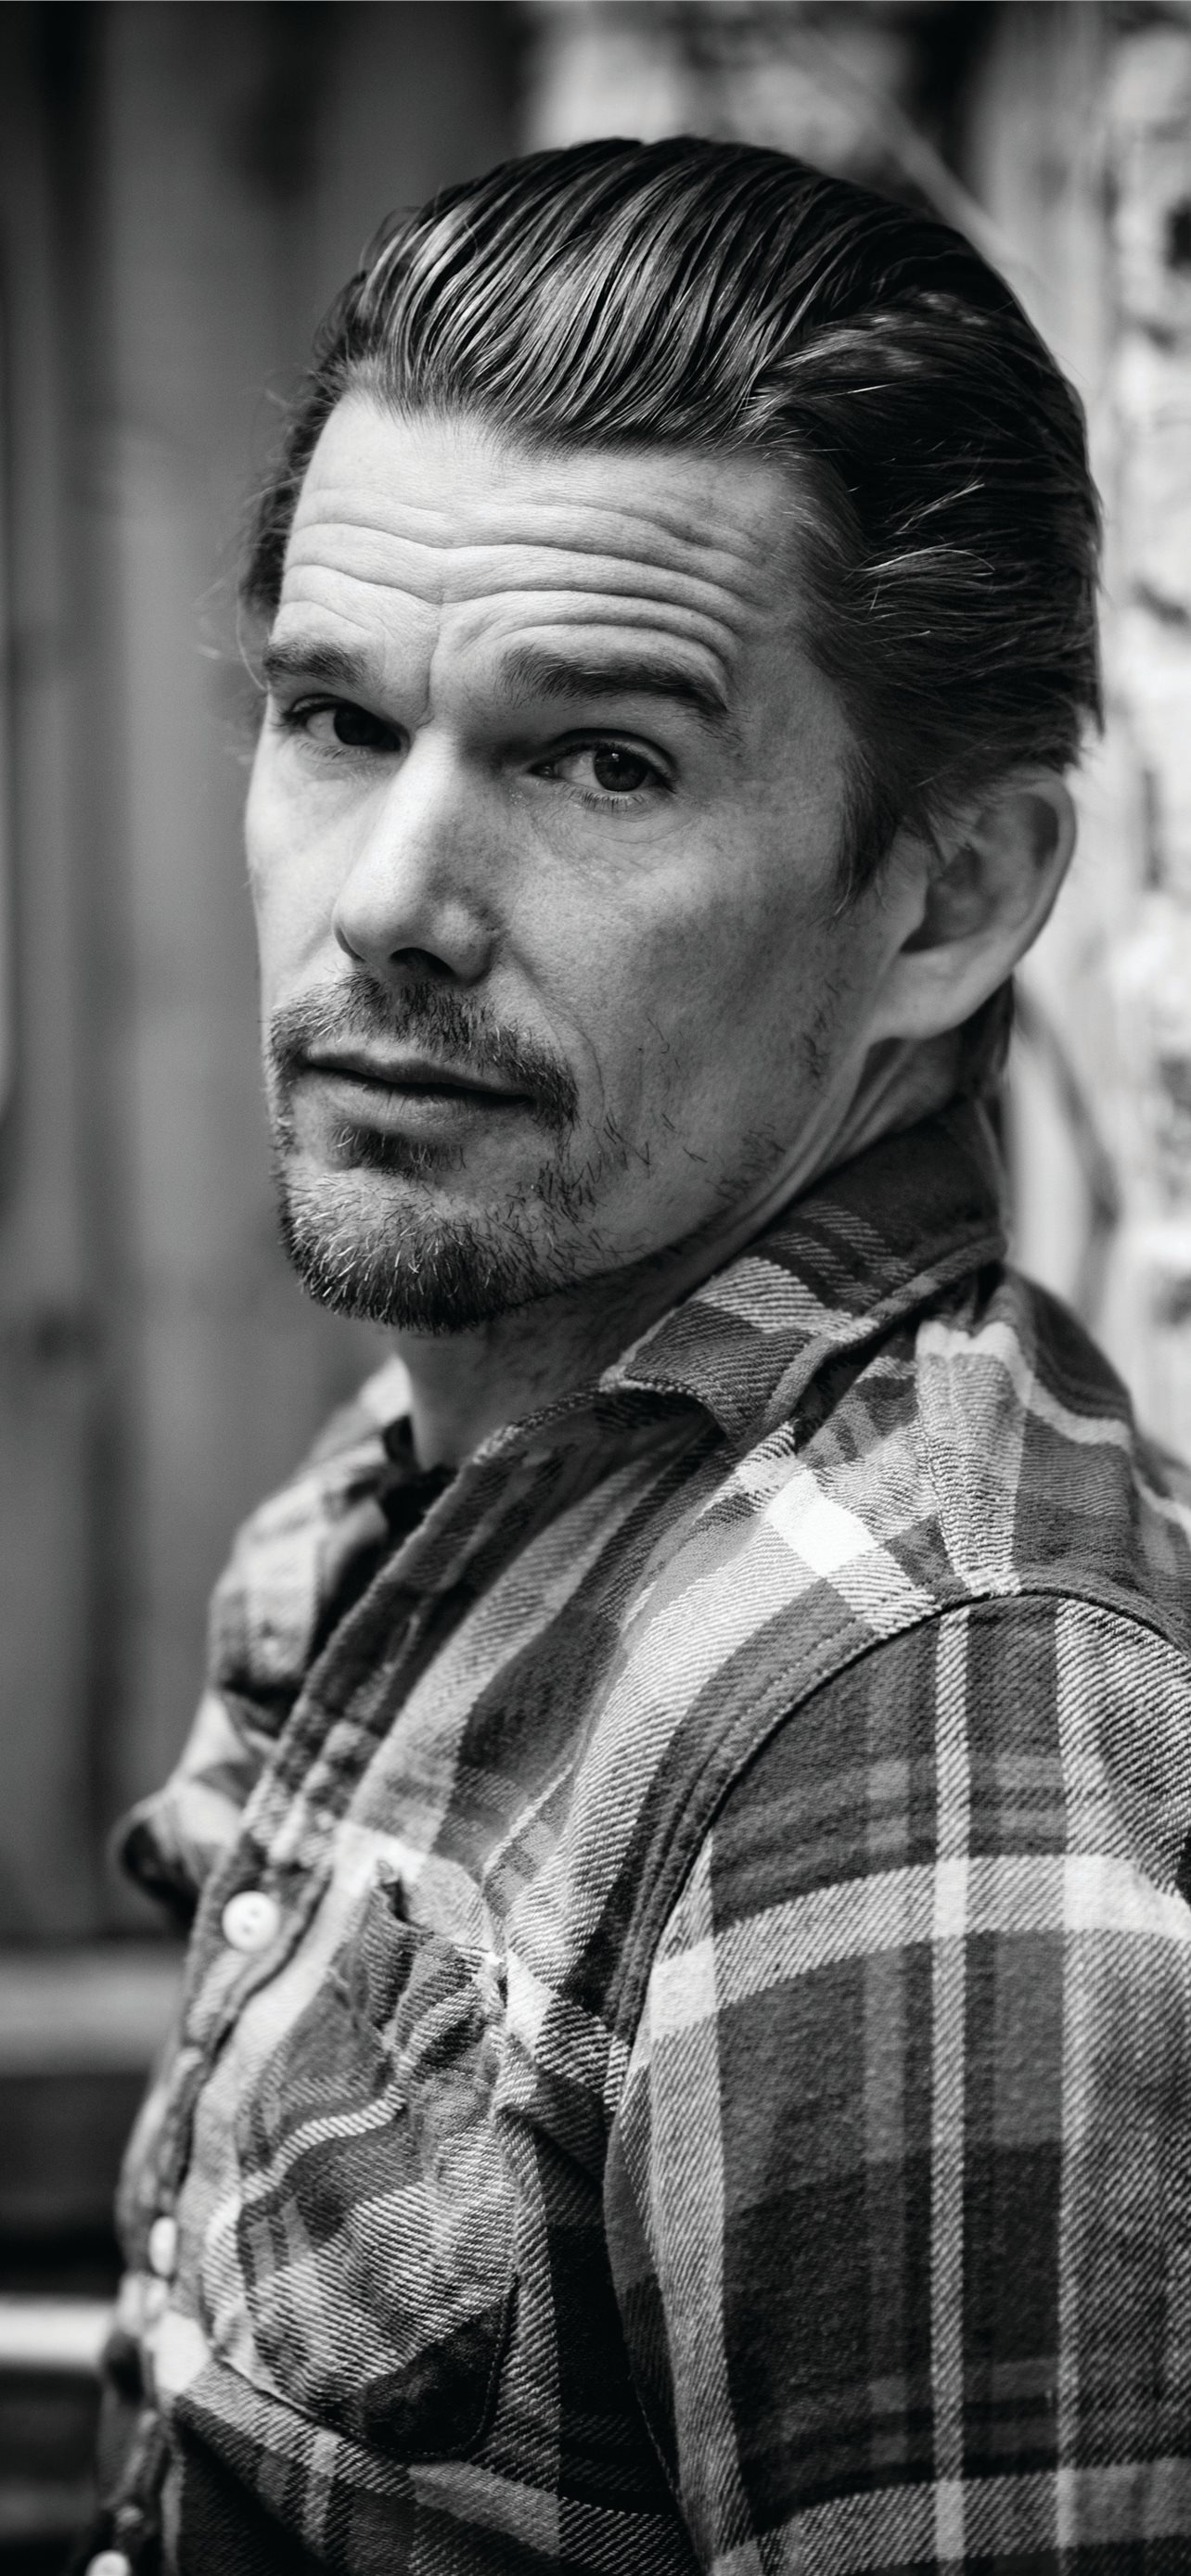 Ethan Hawke: Received four Academy Award nominations, two for Best Supporting Actor for Training Day. 1290x2780 HD Wallpaper.